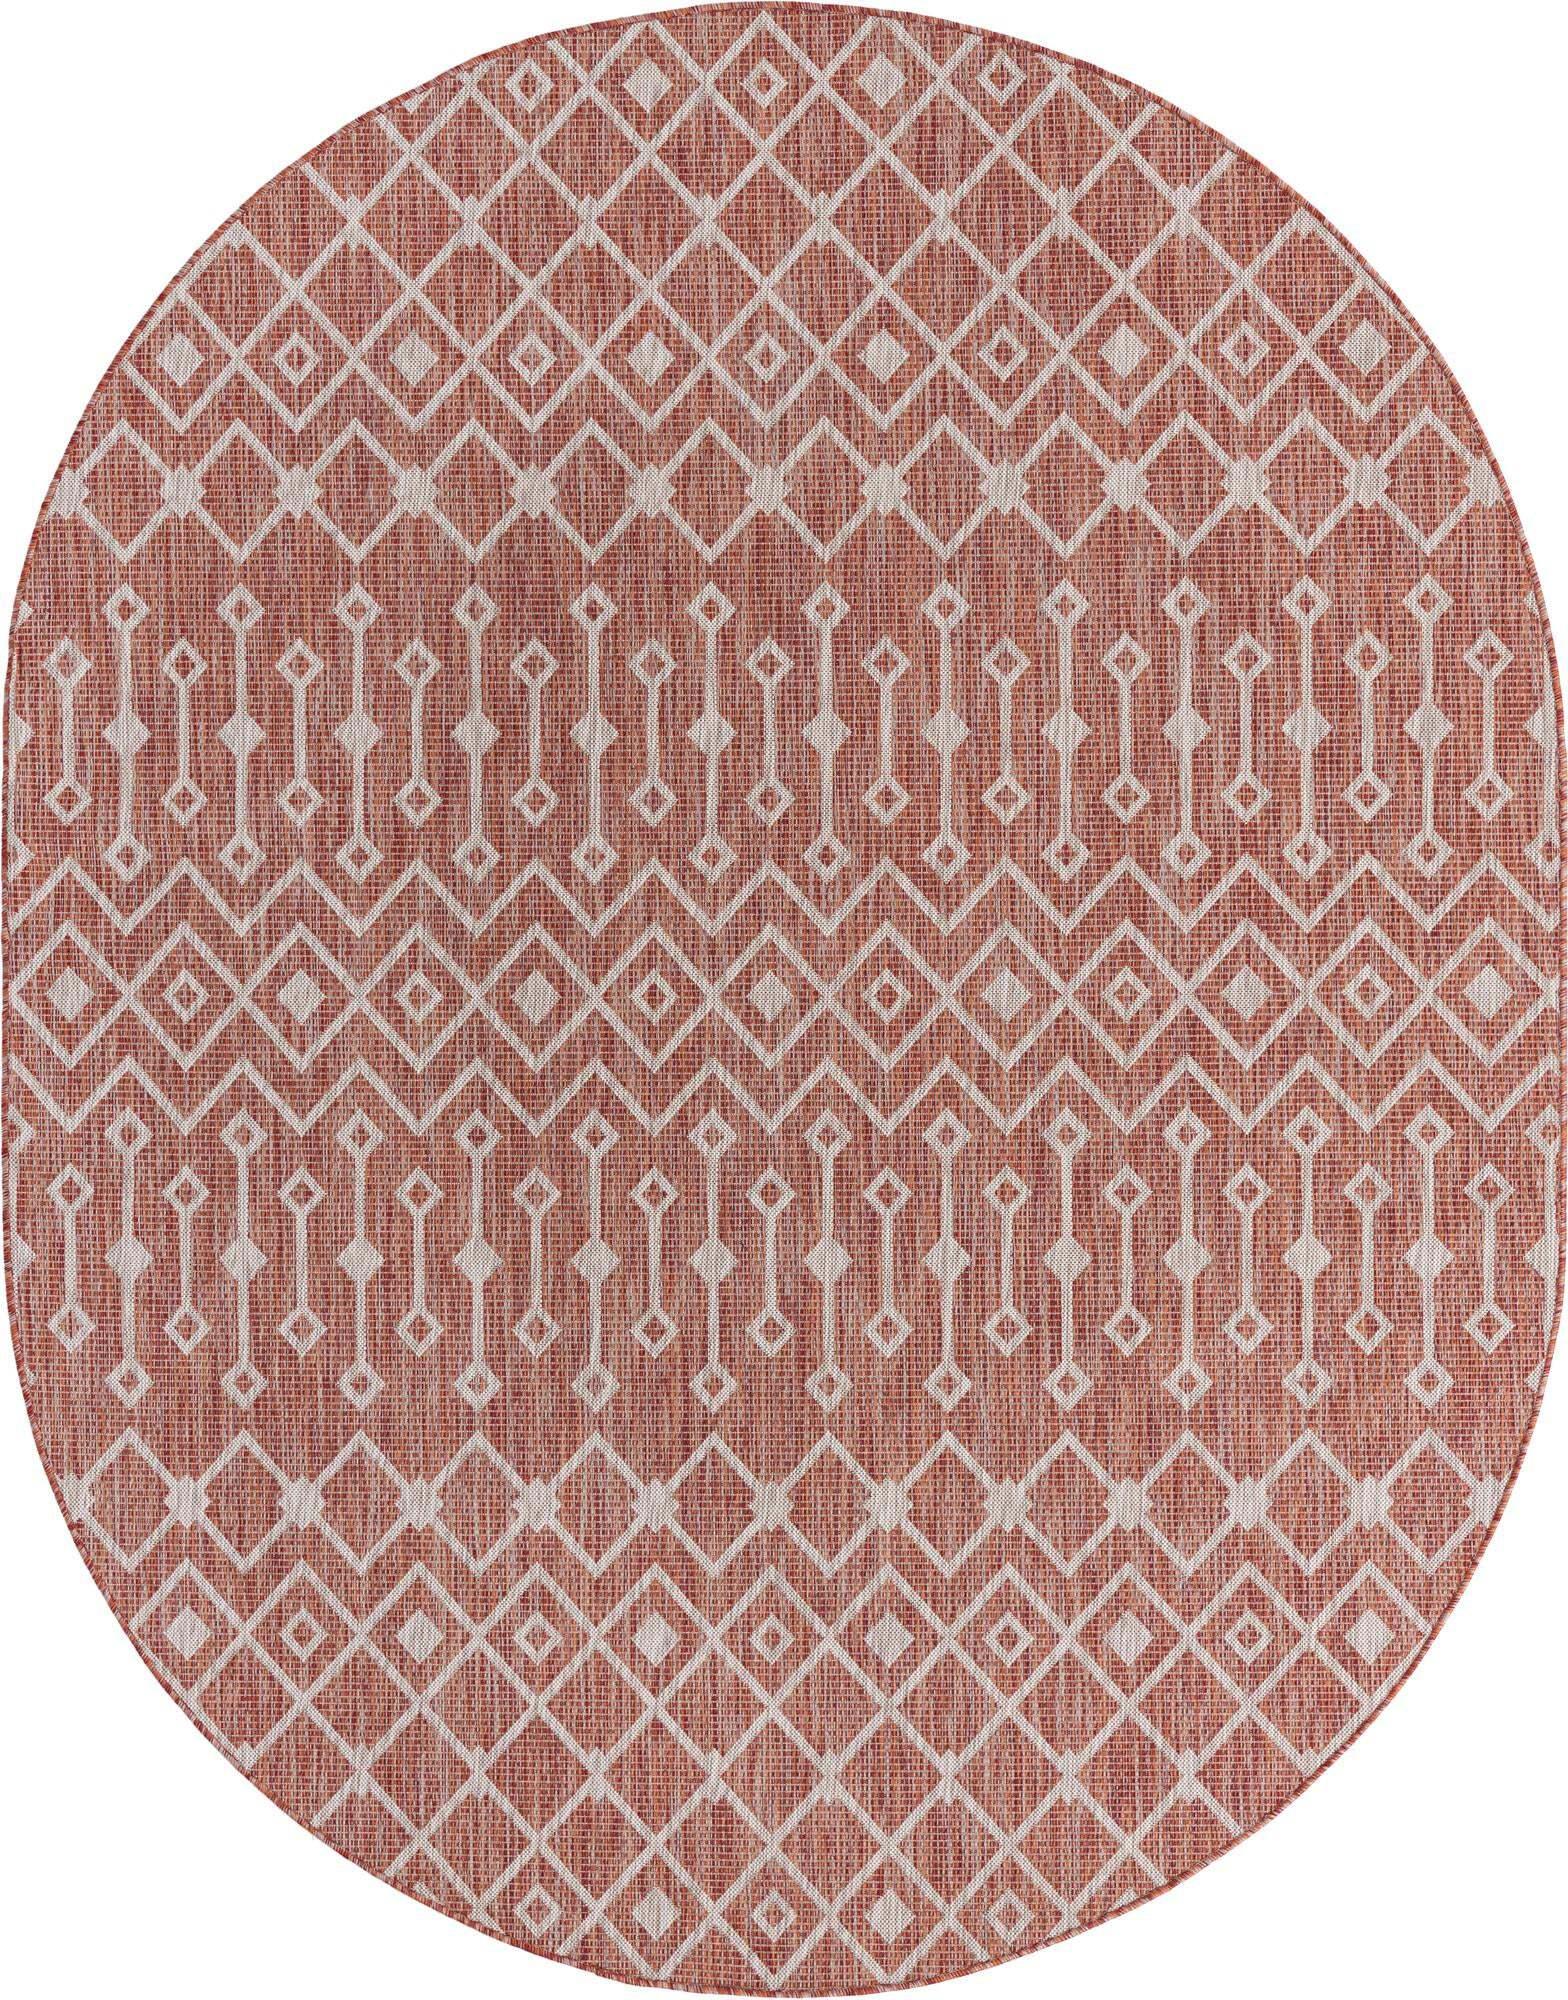 Unique Loom Outdoor Rugs - Outdoor Trellis Geometric Oval 8x10 Oval Rug Rust Red & Gray